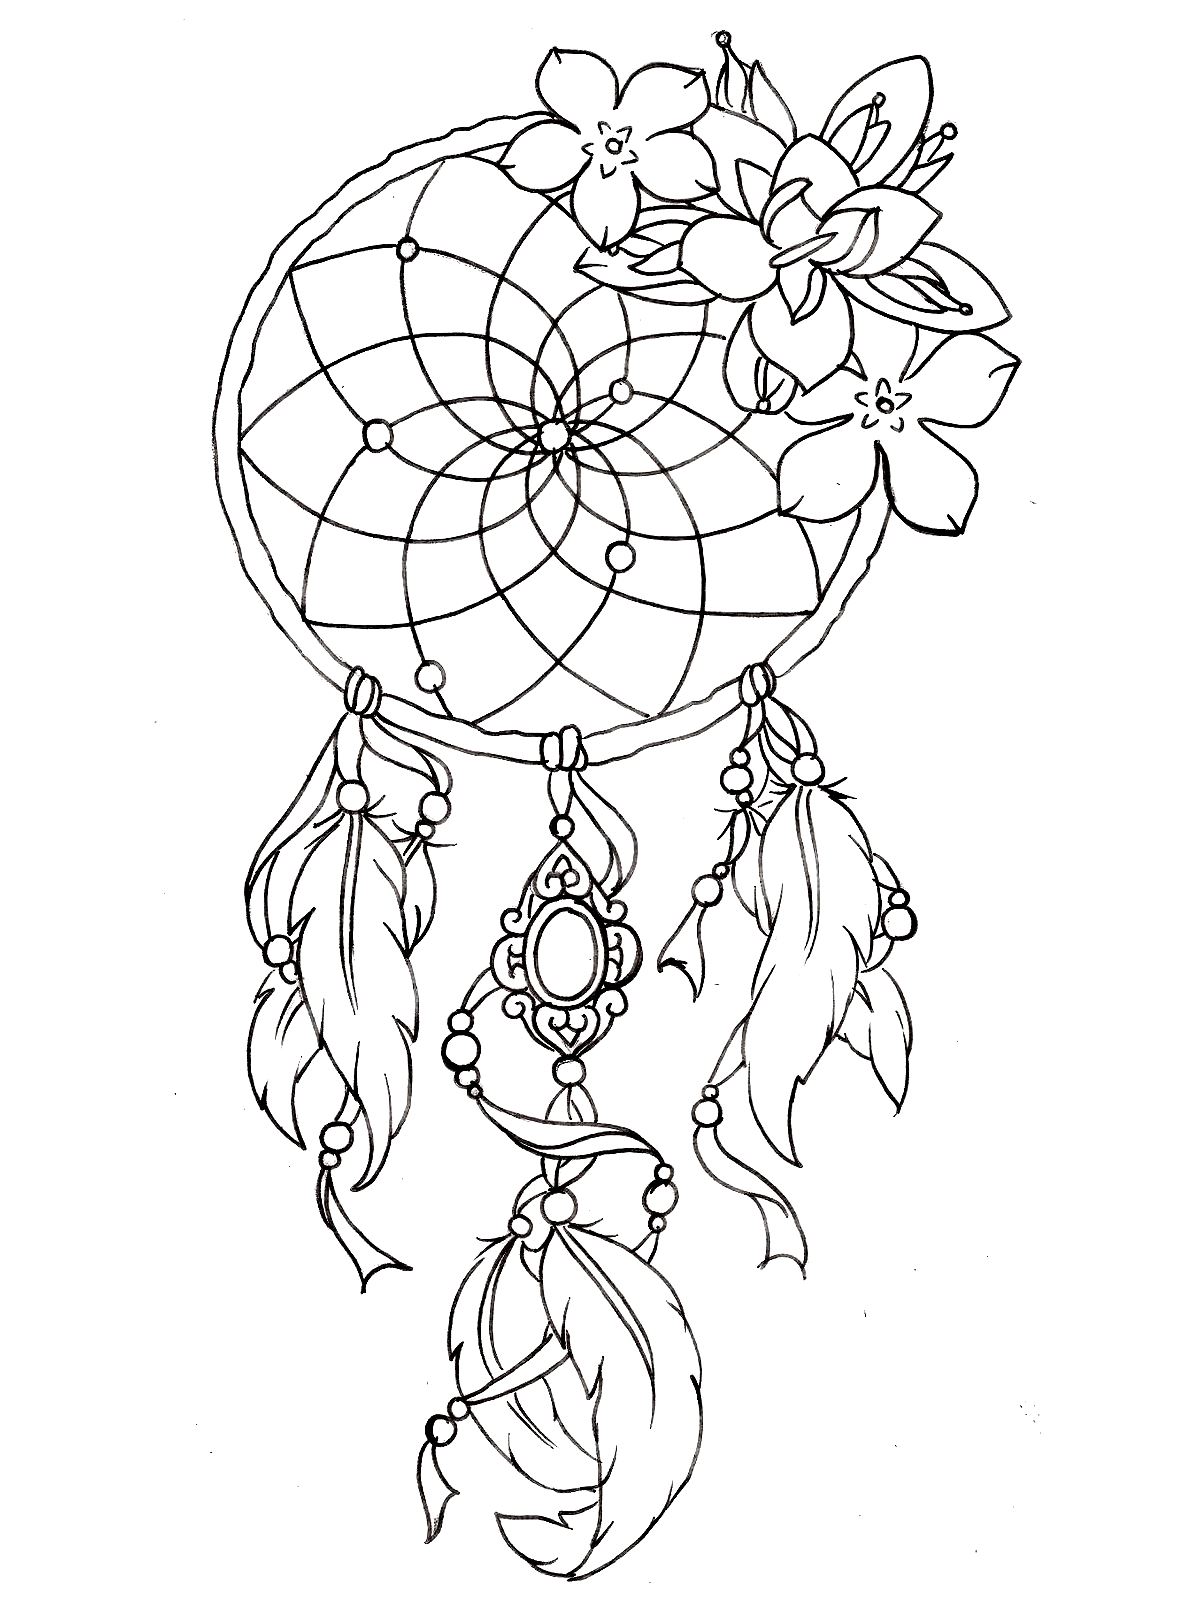 Download Dreamcatcher tattoo designs - Tattoos Adult Coloring Pages